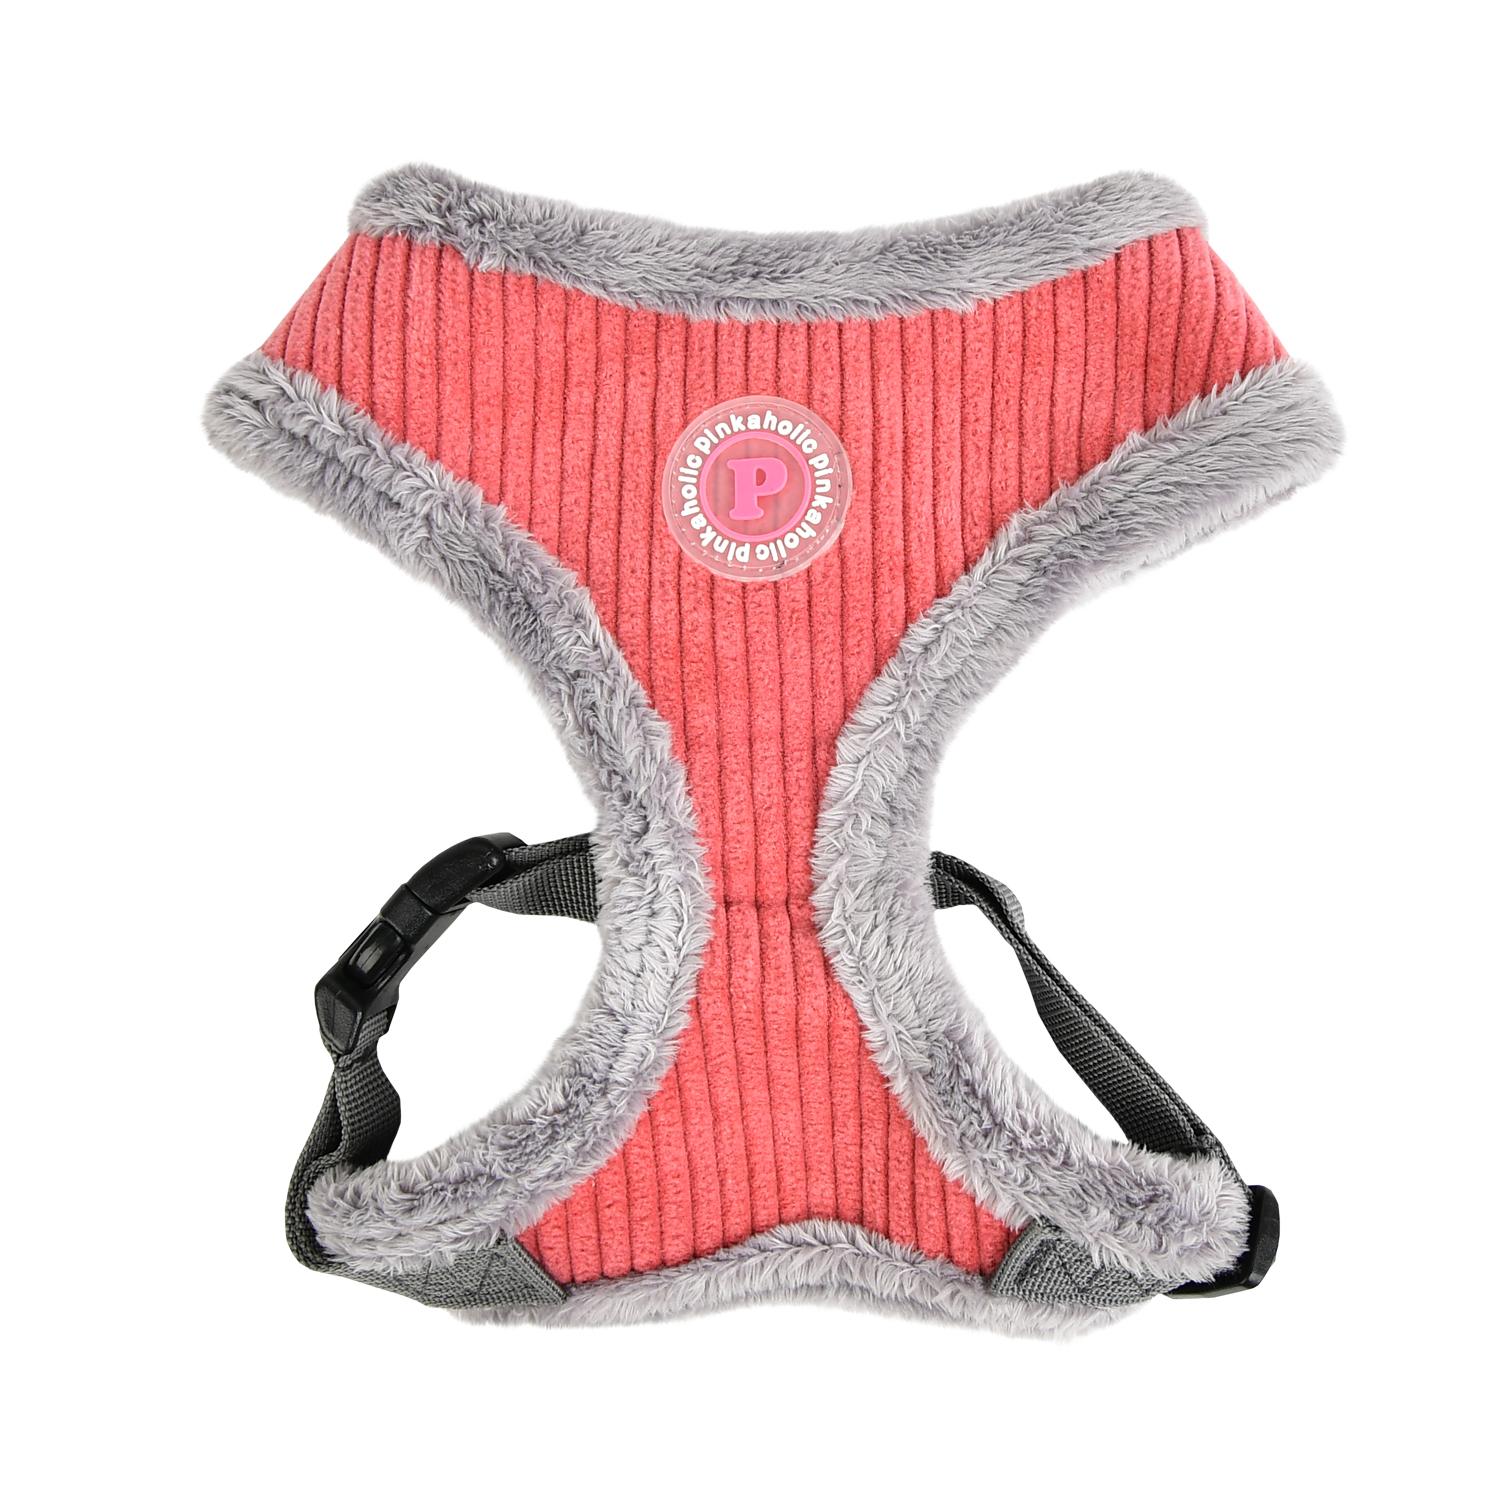 Lucca Dog Harness by Pinkaholic - Dark Pink